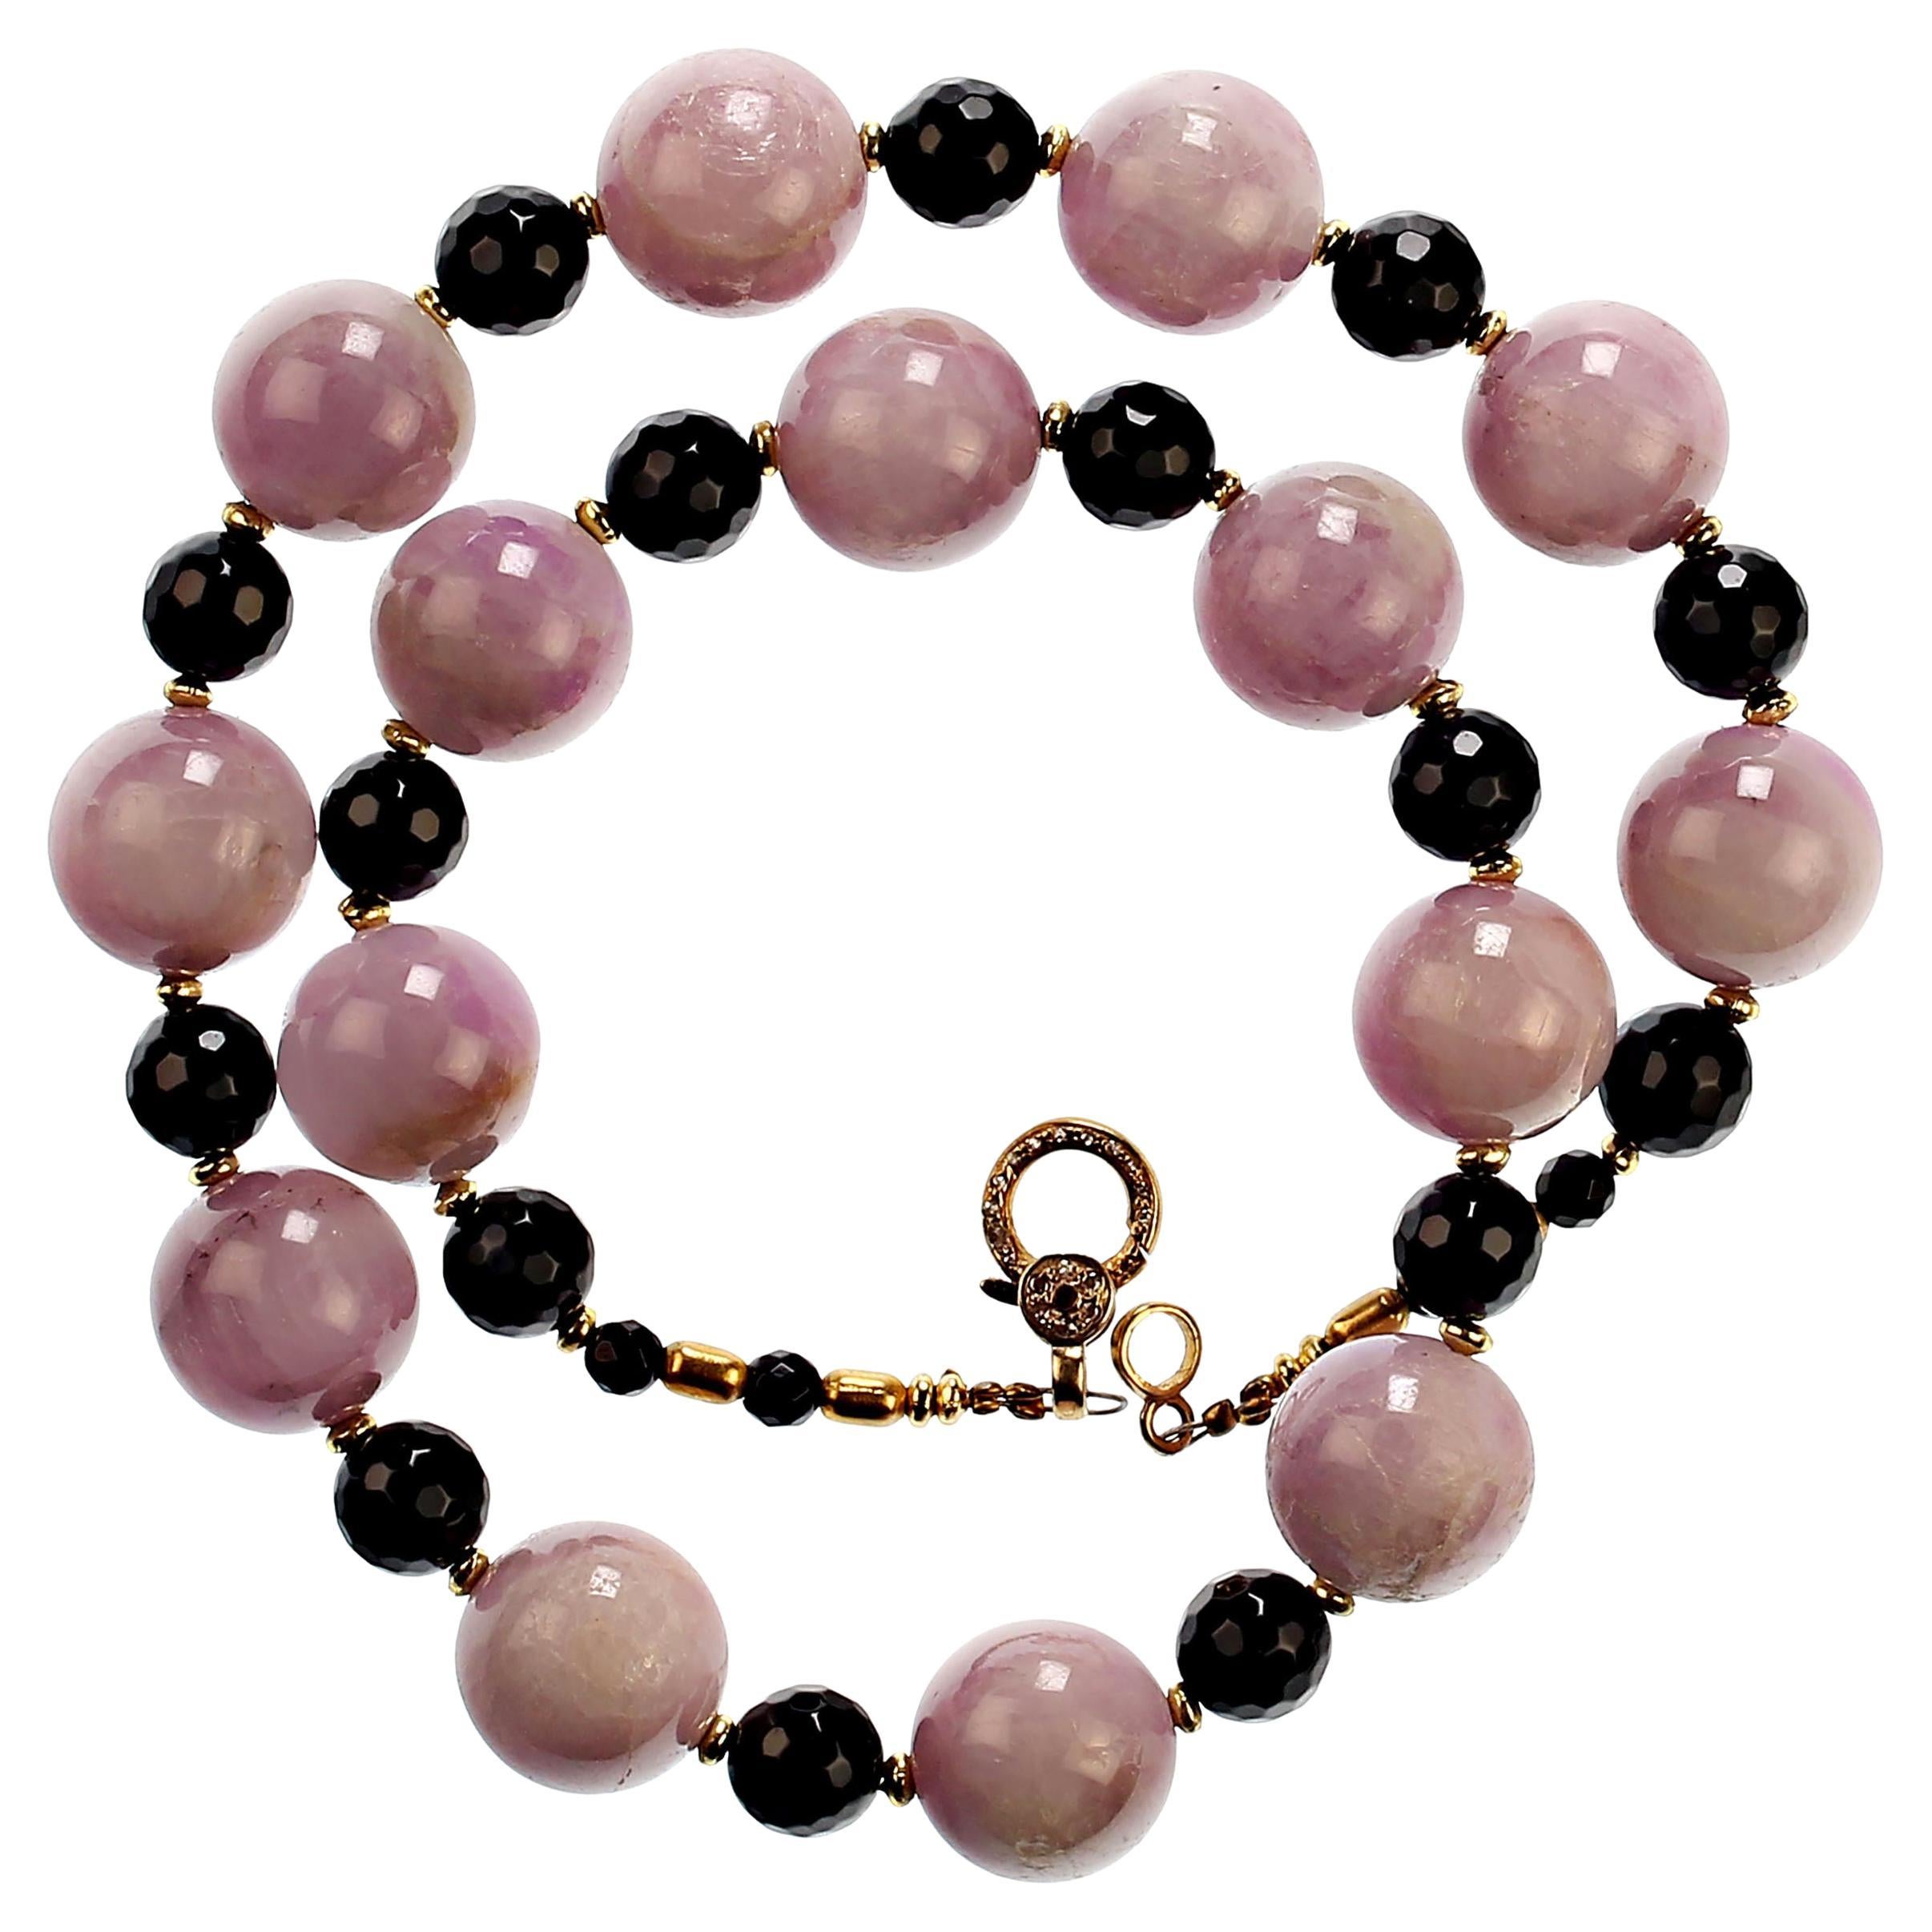  AJD Sophisticated Opaque Mauve Kunzite and Black Onyx Necklace For Sale